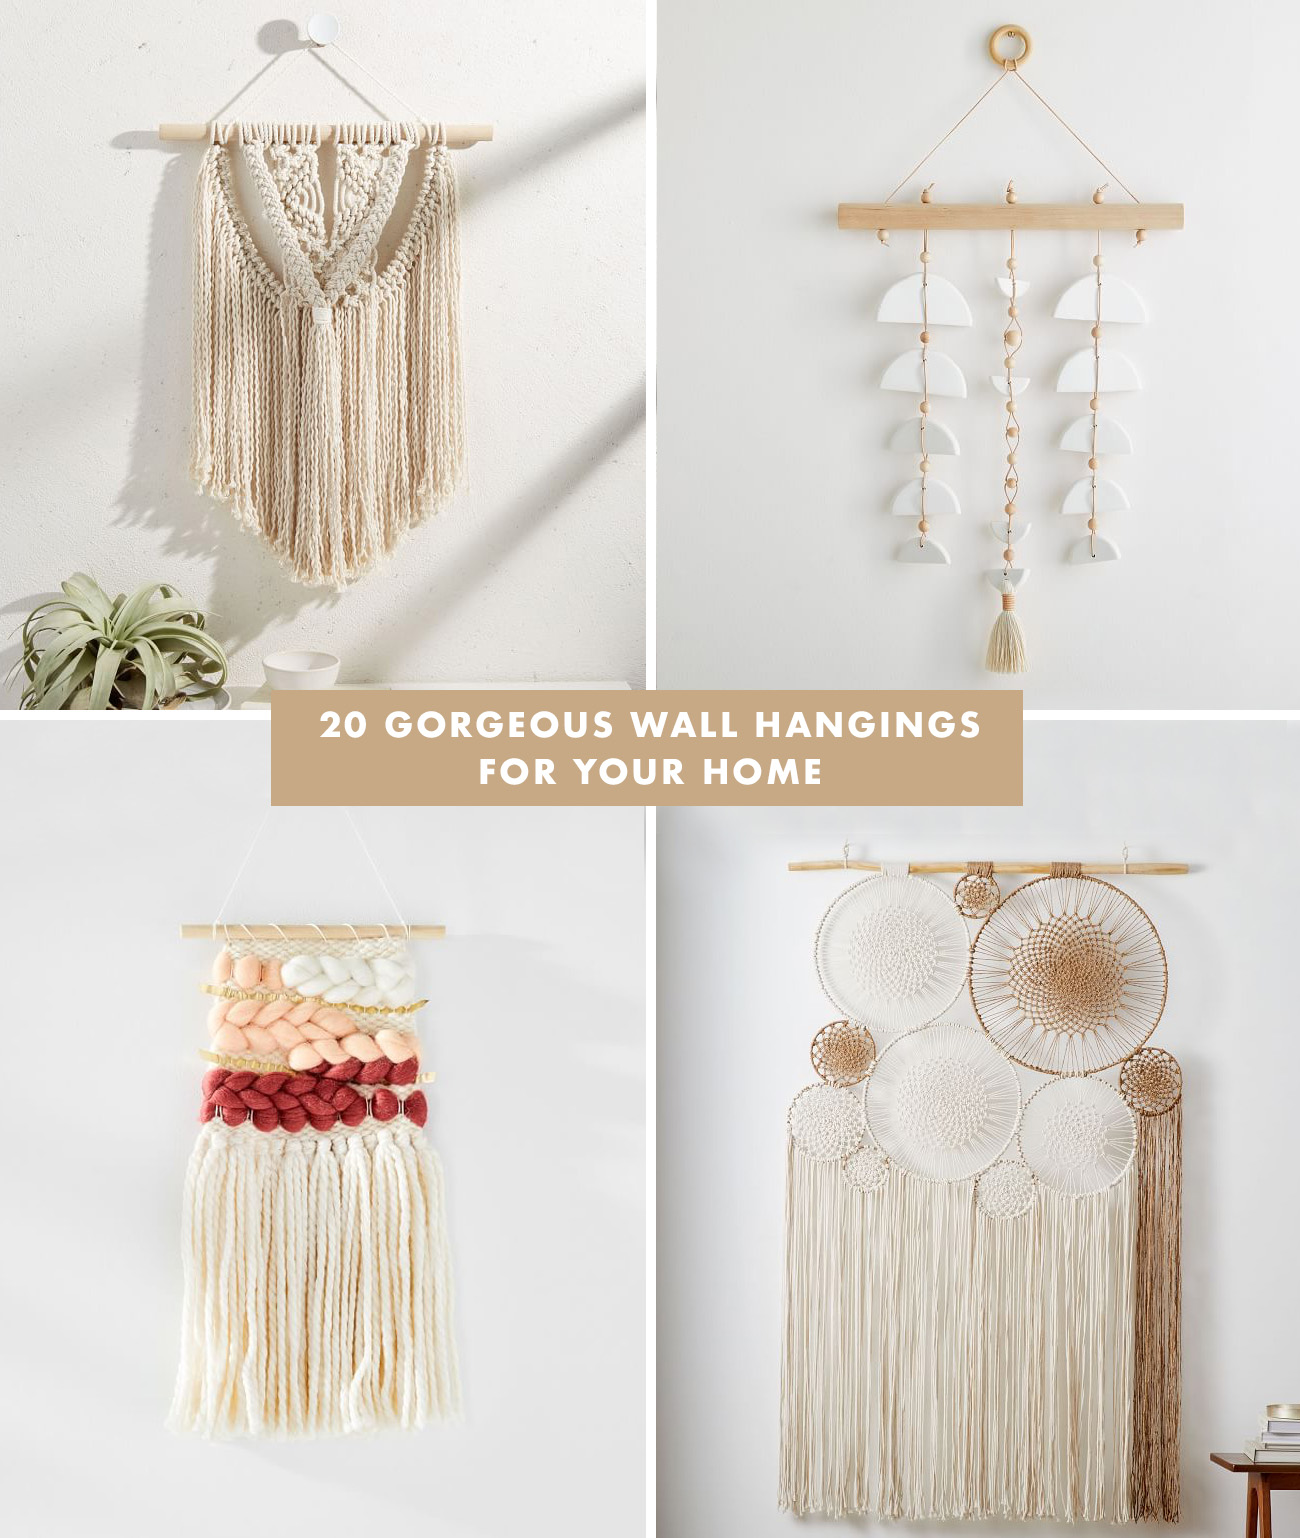 20 Gorgeous Wall Hangings for your Home